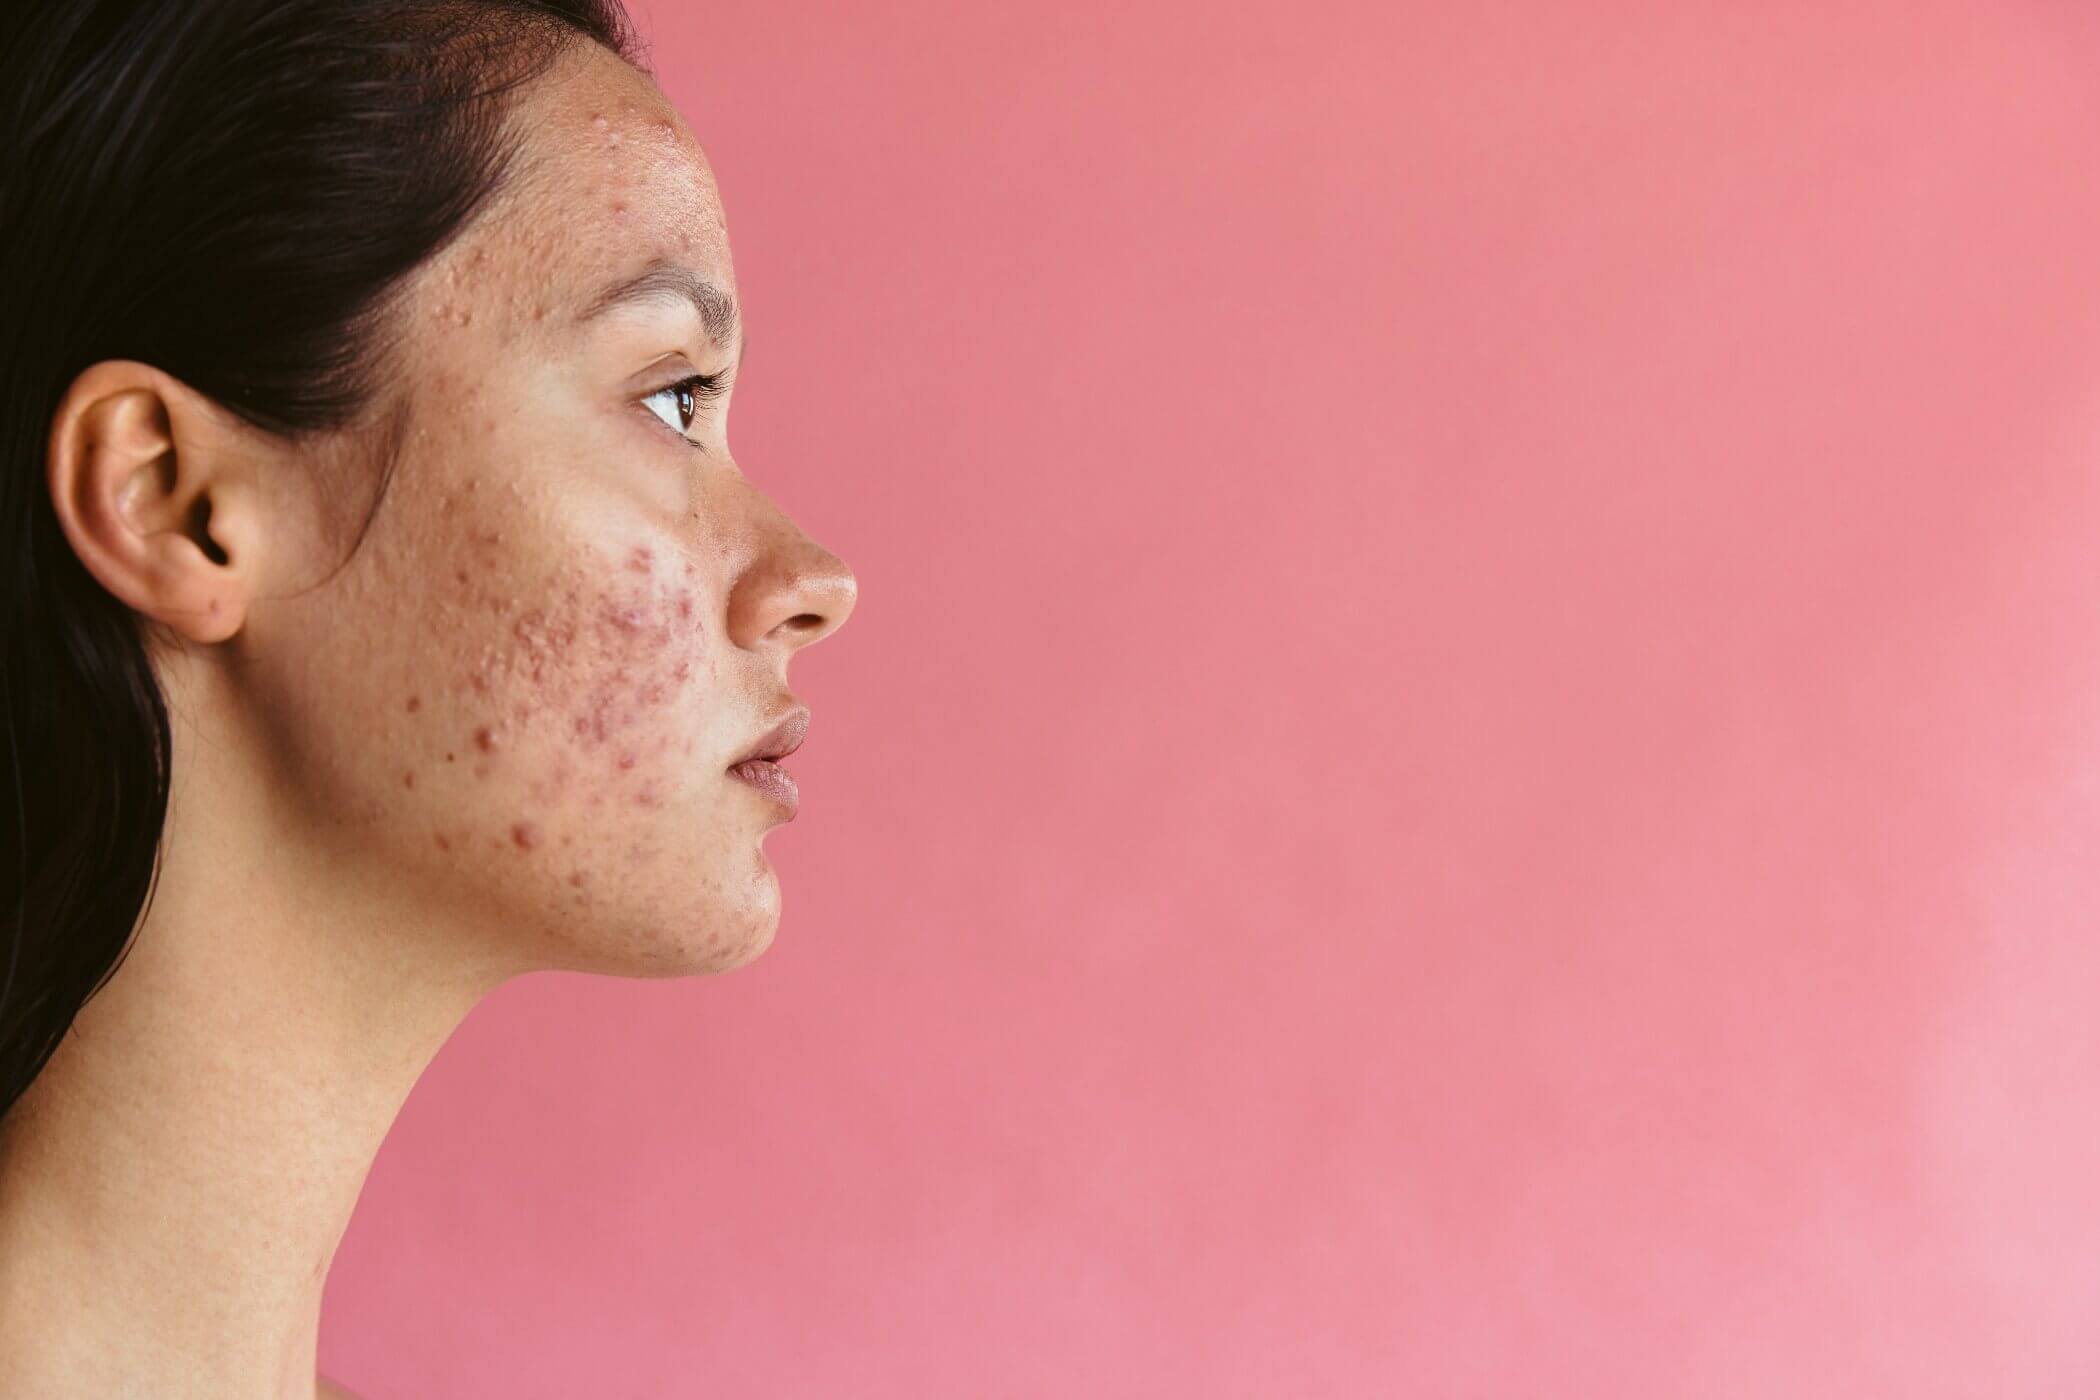 What Is The Best Acne Treatment?